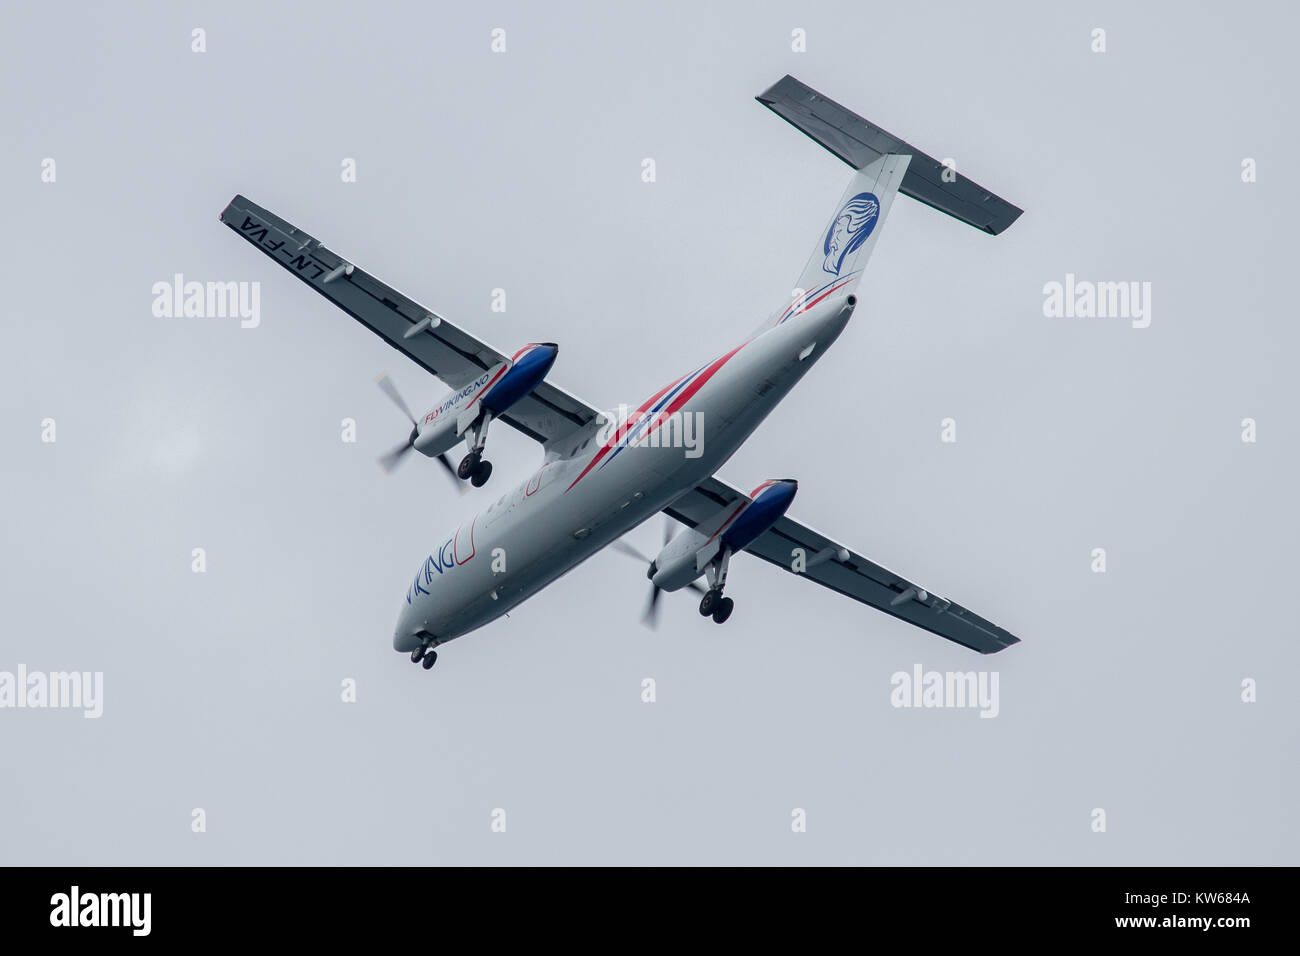 Stokmarknes Norway July 12 17 A Bombardier Dash 8 100 Plane In Stock Photo Alamy